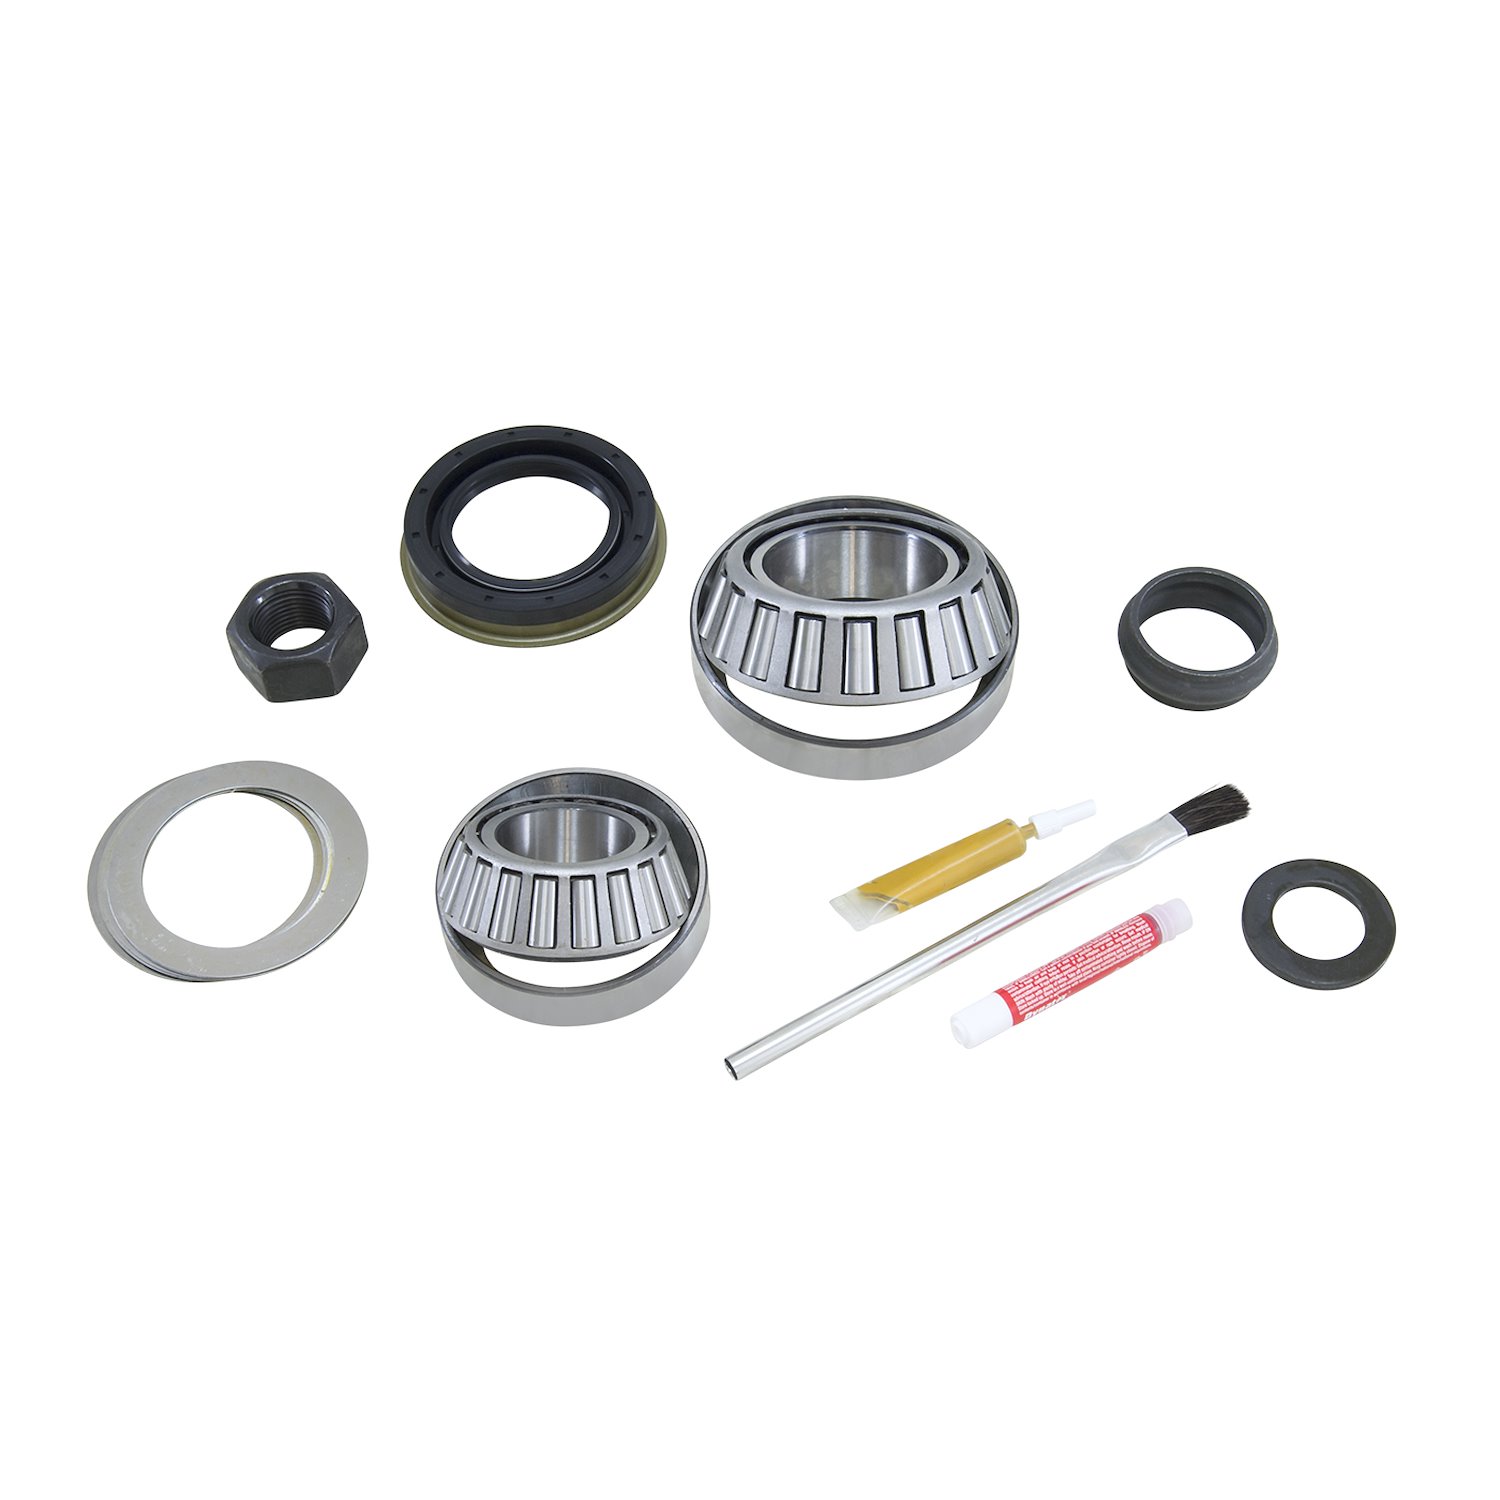 Pinion Install Kit For Dana 80 Differential (4.125 in. Od Only).